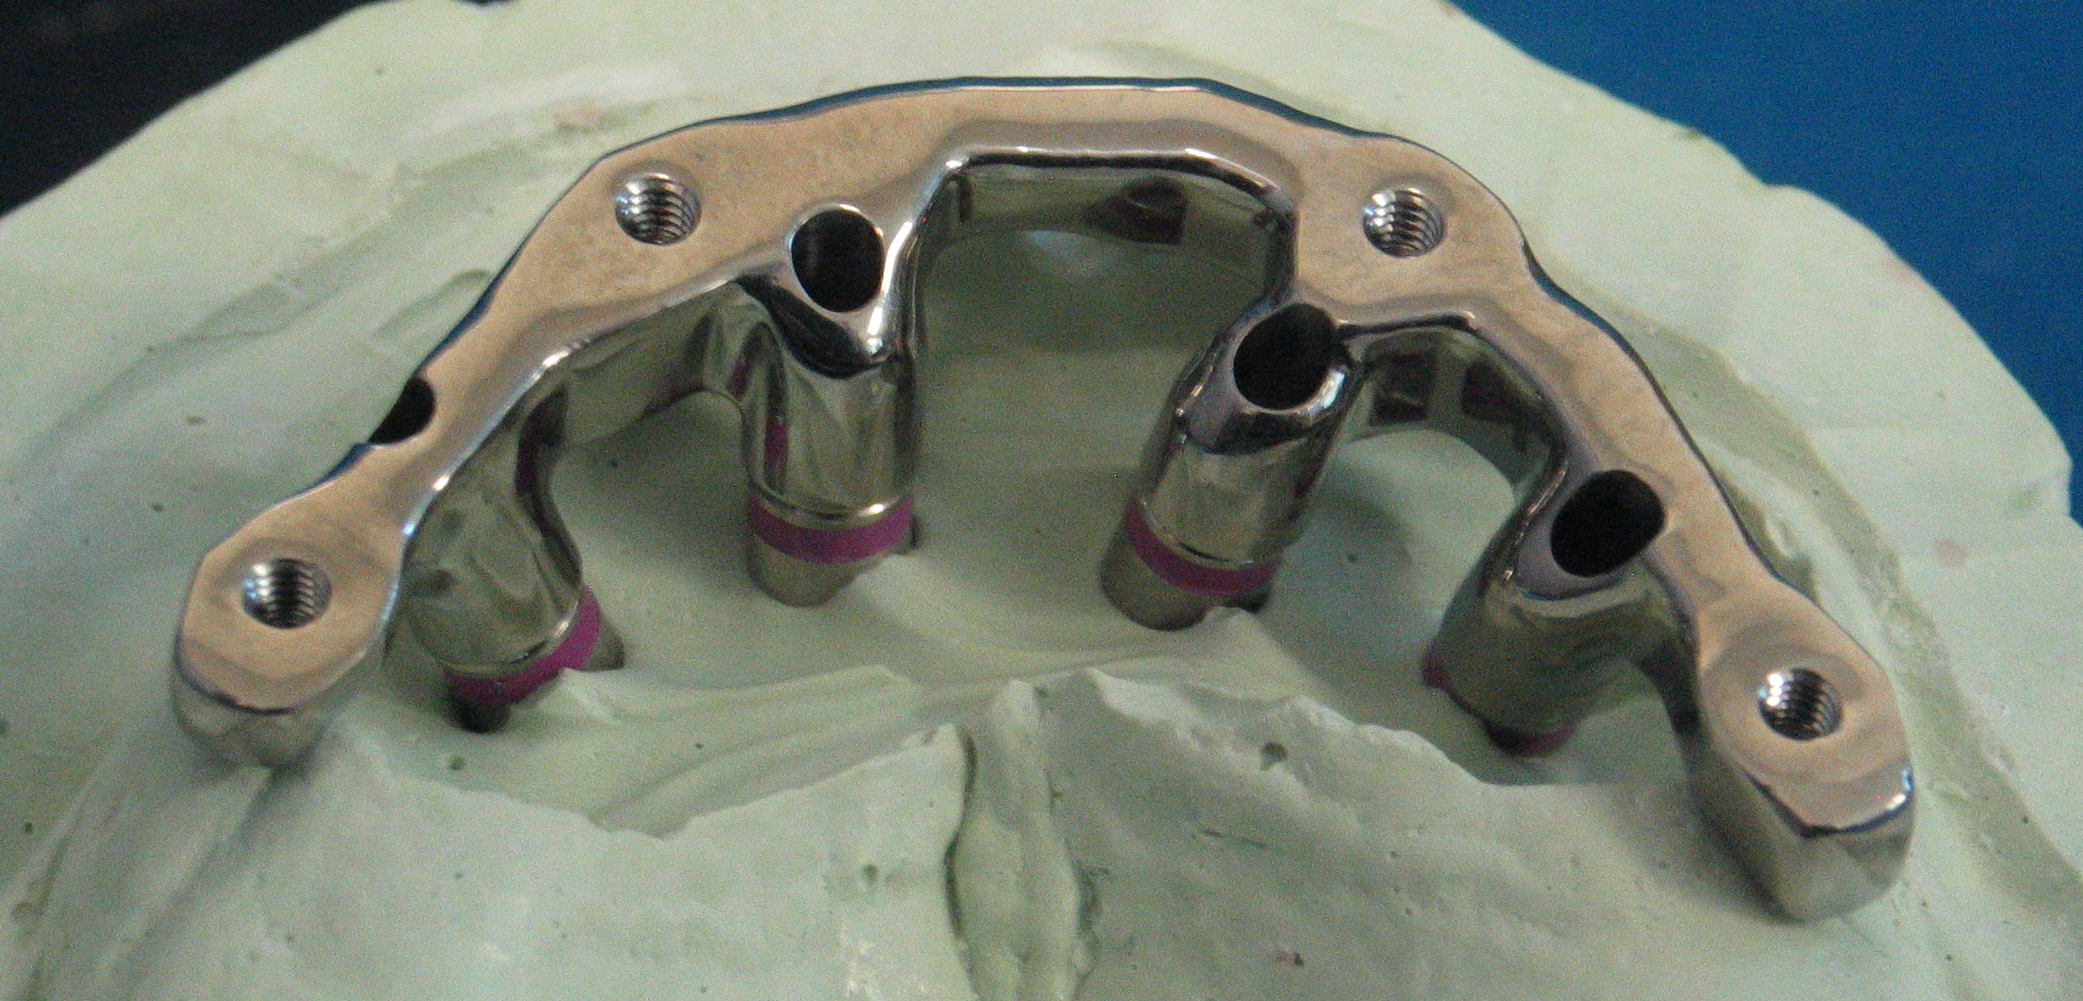 Overdenture bar for threaded Locators or Clix Attachments.